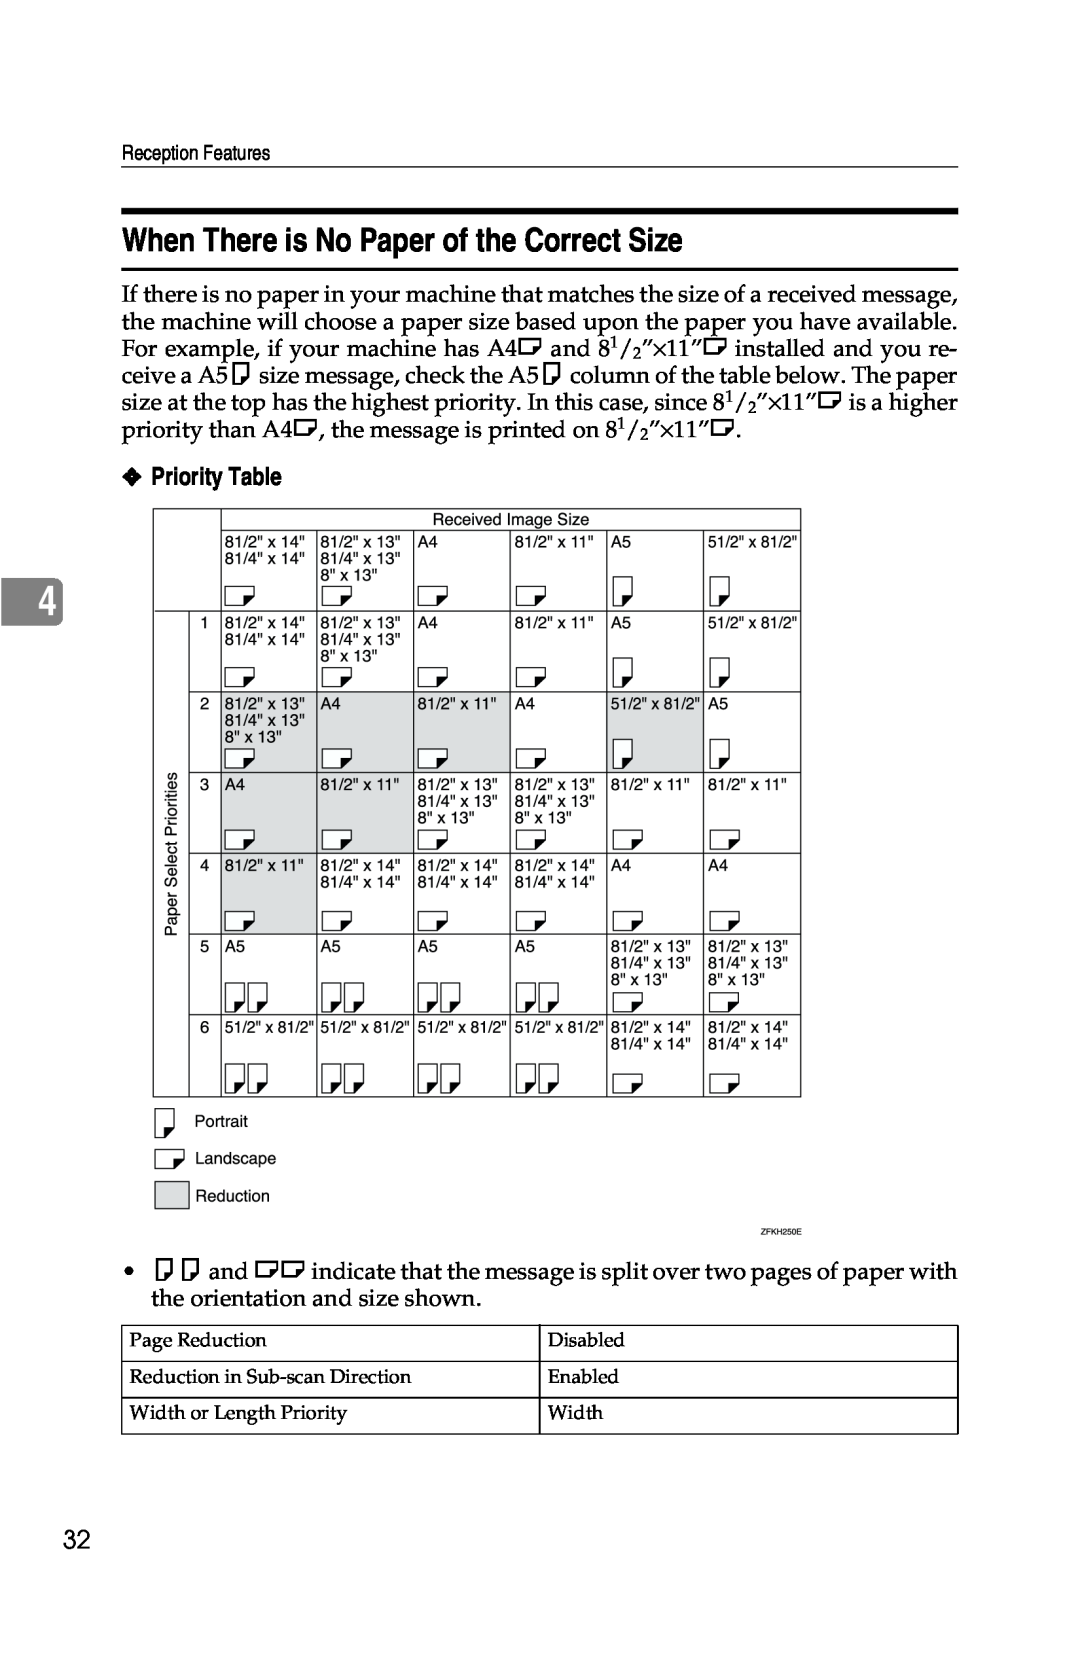 Savin G1619 manual When There is No Paper of the Correct Size, Priority Table 